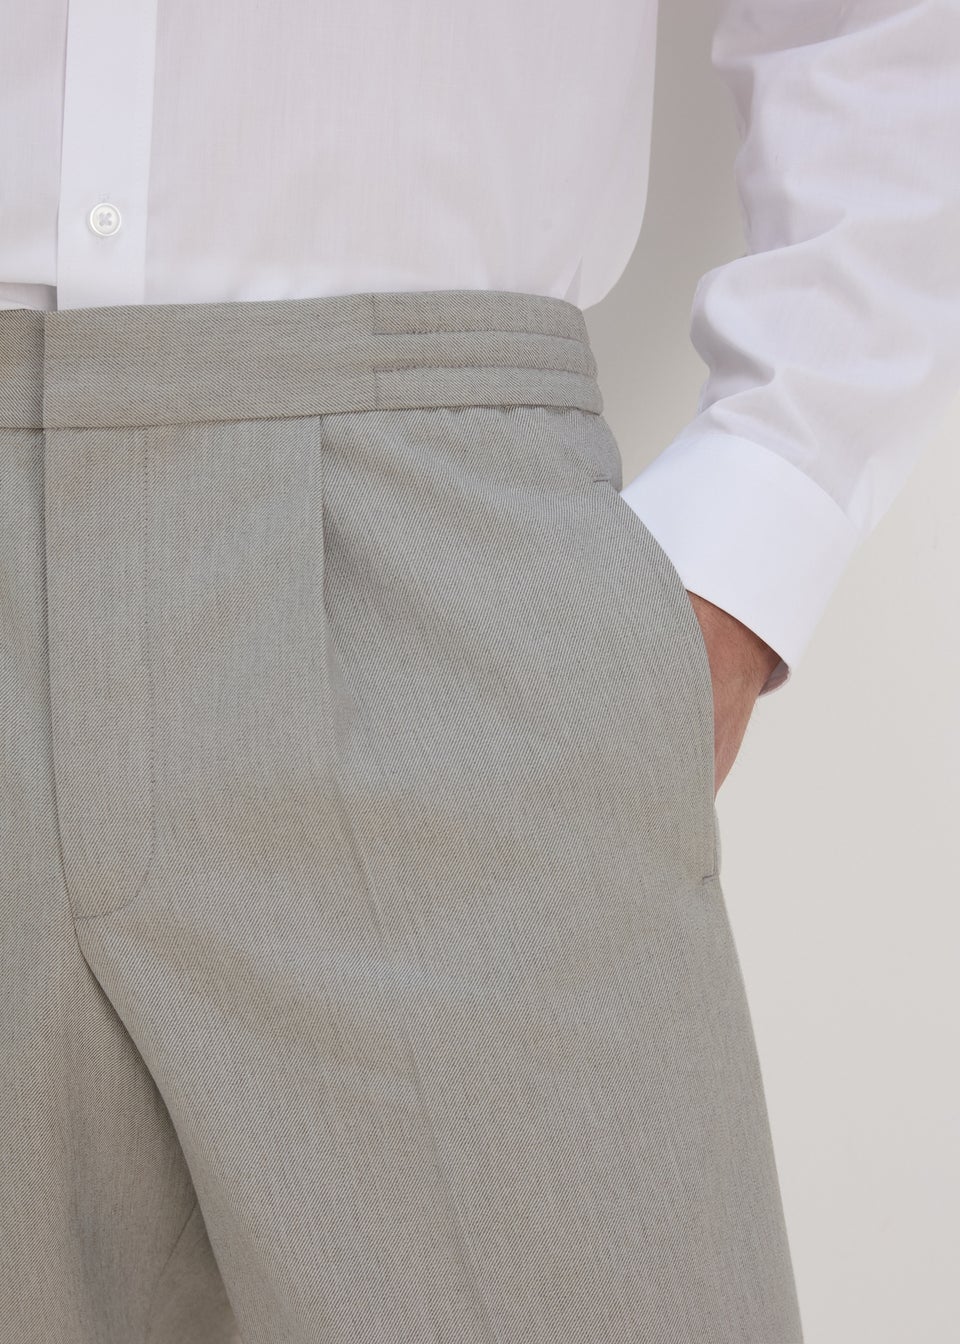 Taylor & Wright Grey Twill Pleated Trousers